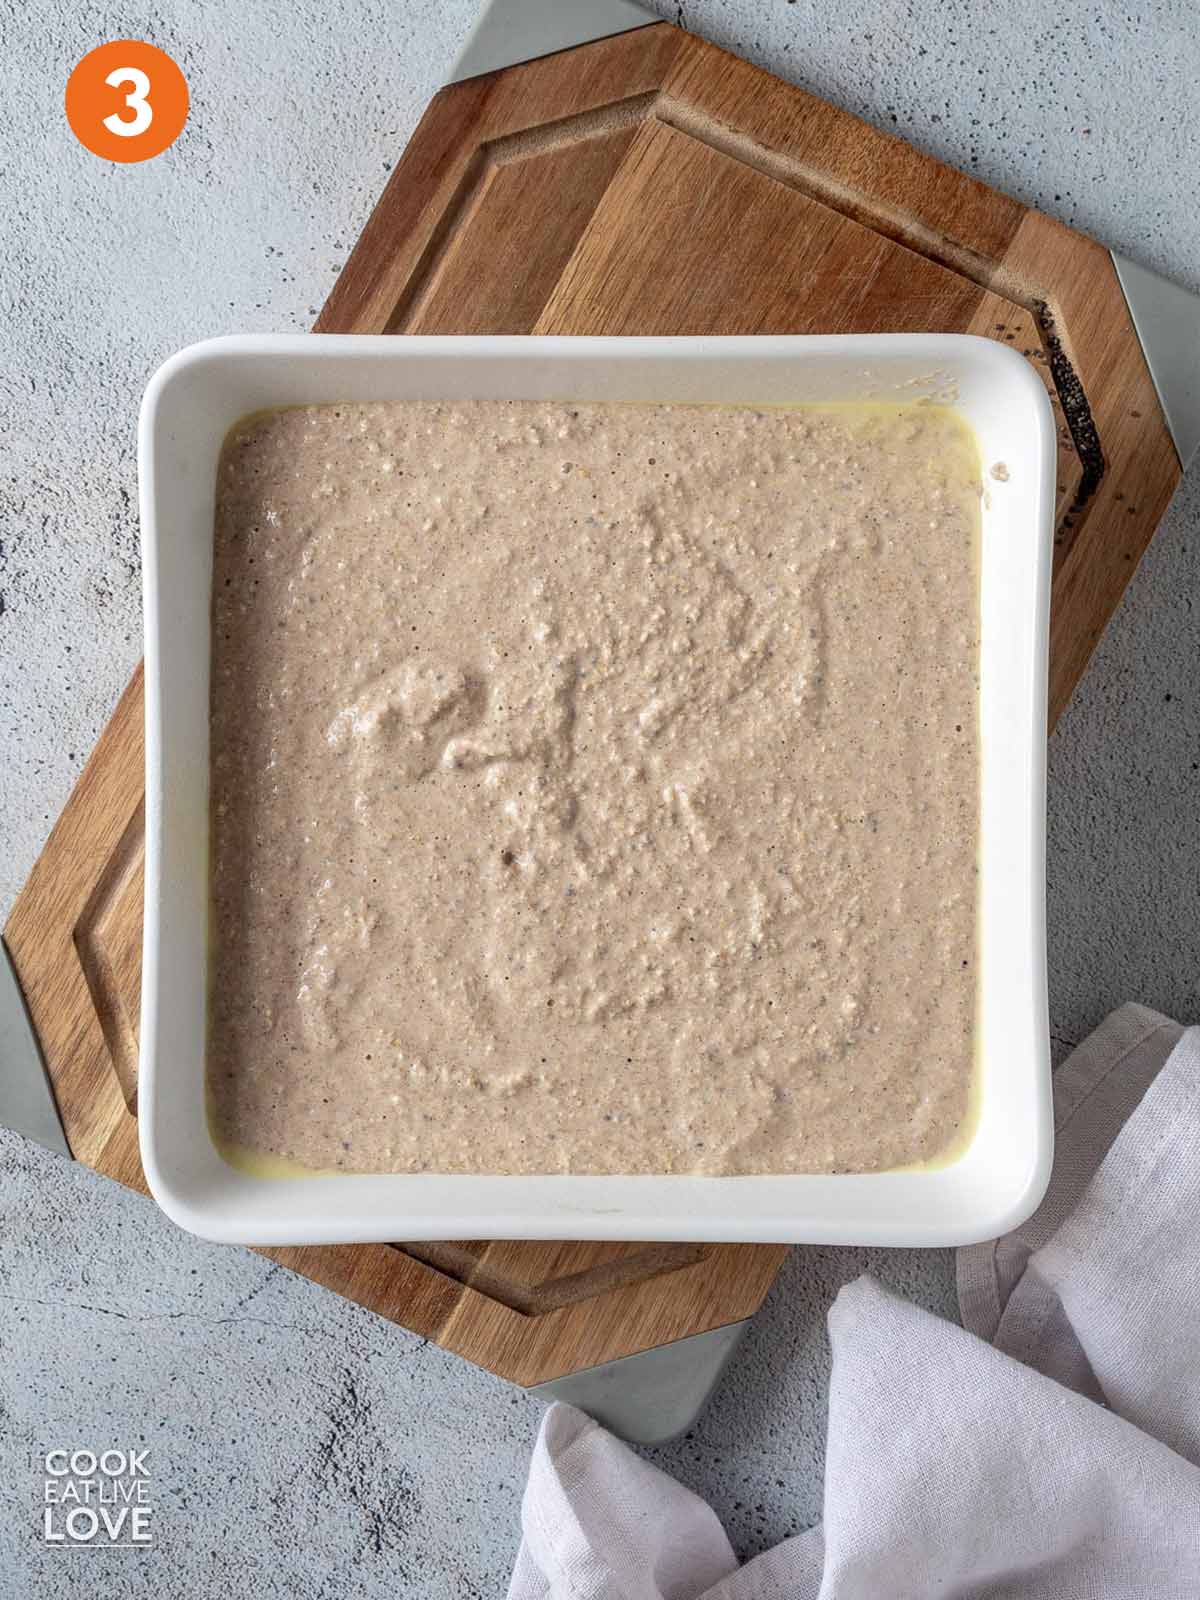 Blended baked oatmeal mixture poured into a baking dish.